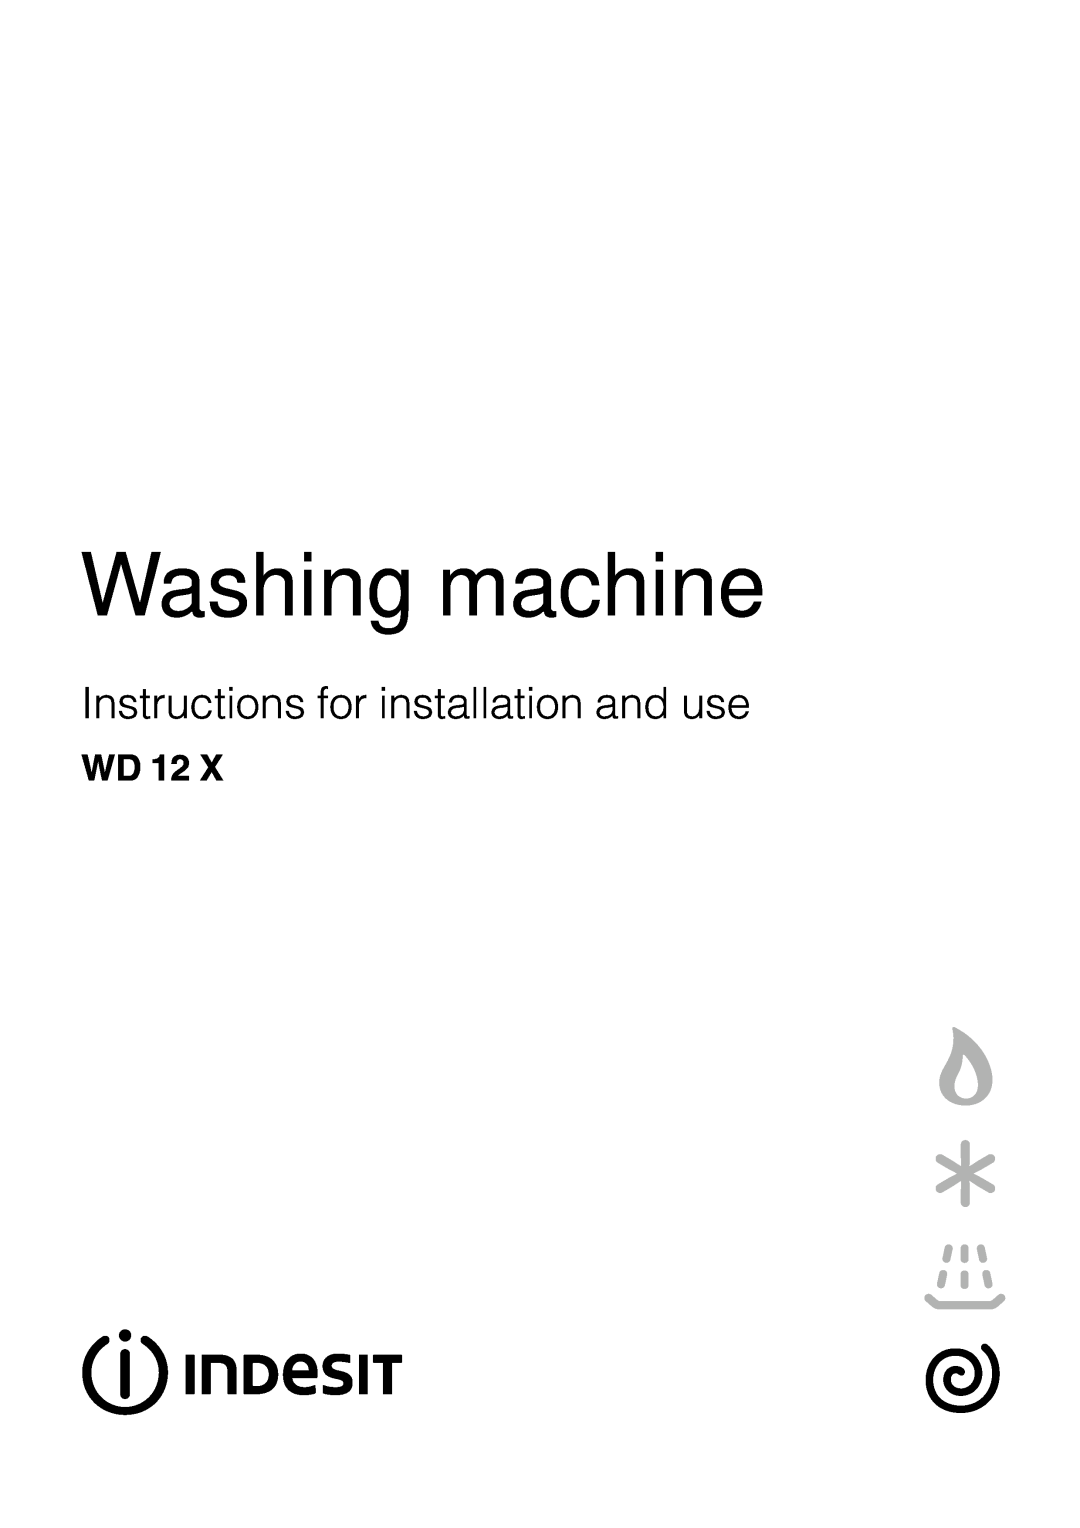 Indesit WD 12 X manual Washing machine, Instructions for installation and use 